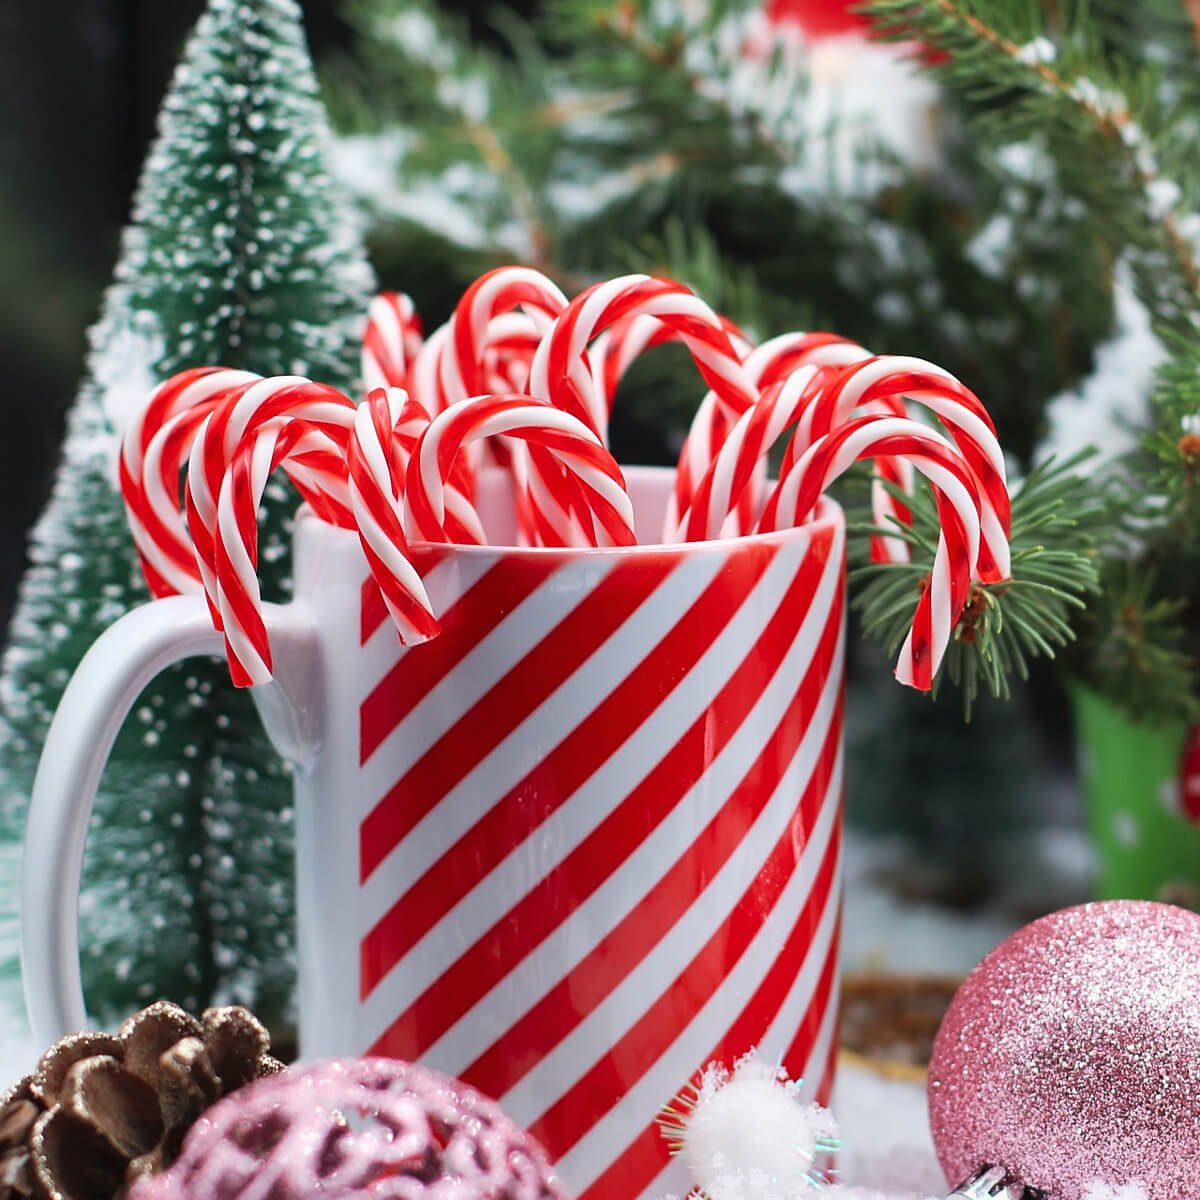 Red an white striped mug filled with striped candy canes of the same colour, with Christmas tree in background